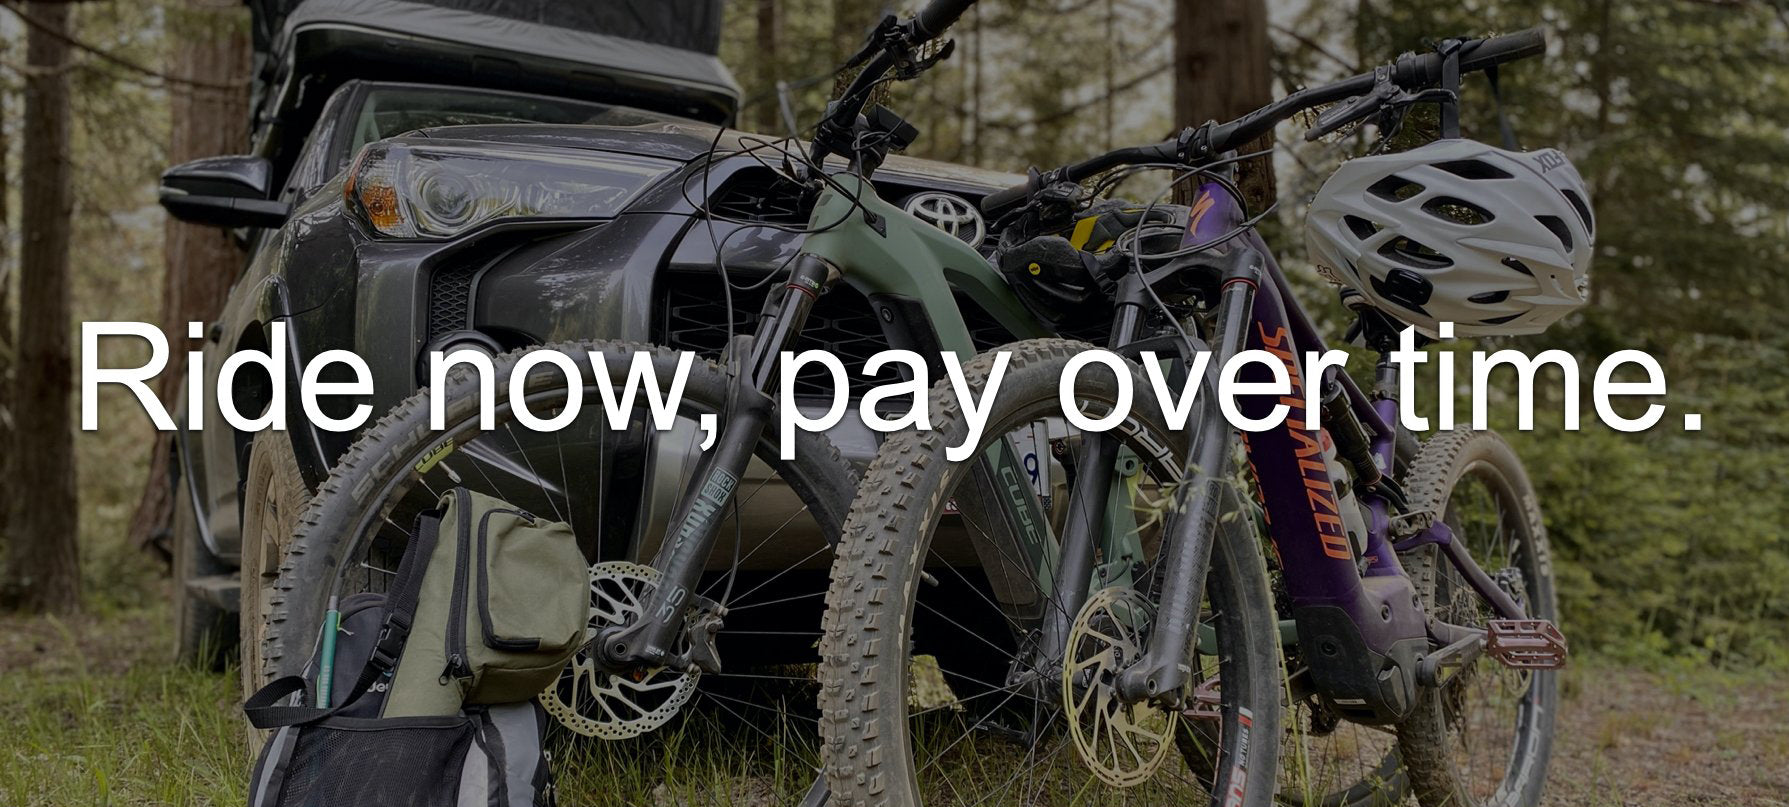 Ride Now, Pay Over Time with Affirm financing at Fly Rides